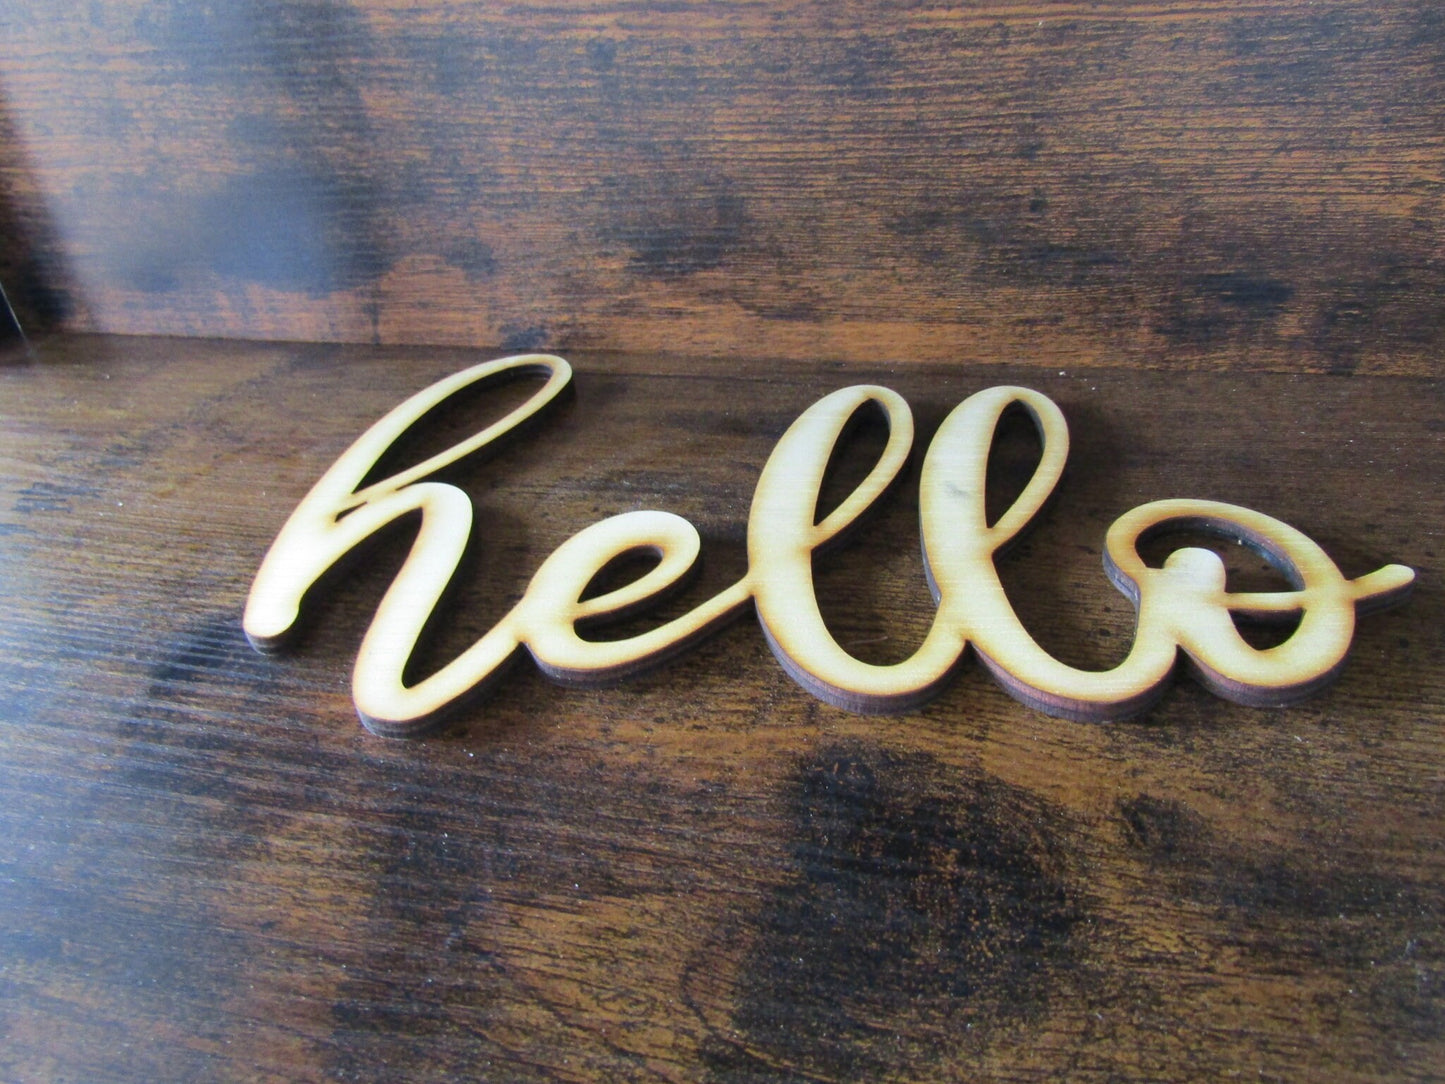 Cursive Hello Sign Hello Cut Out Hello DIY Wood Word Crafts Wreath Laser Cut Wood Word Wooden Handmade Decor Birch Do It Yourself Natural